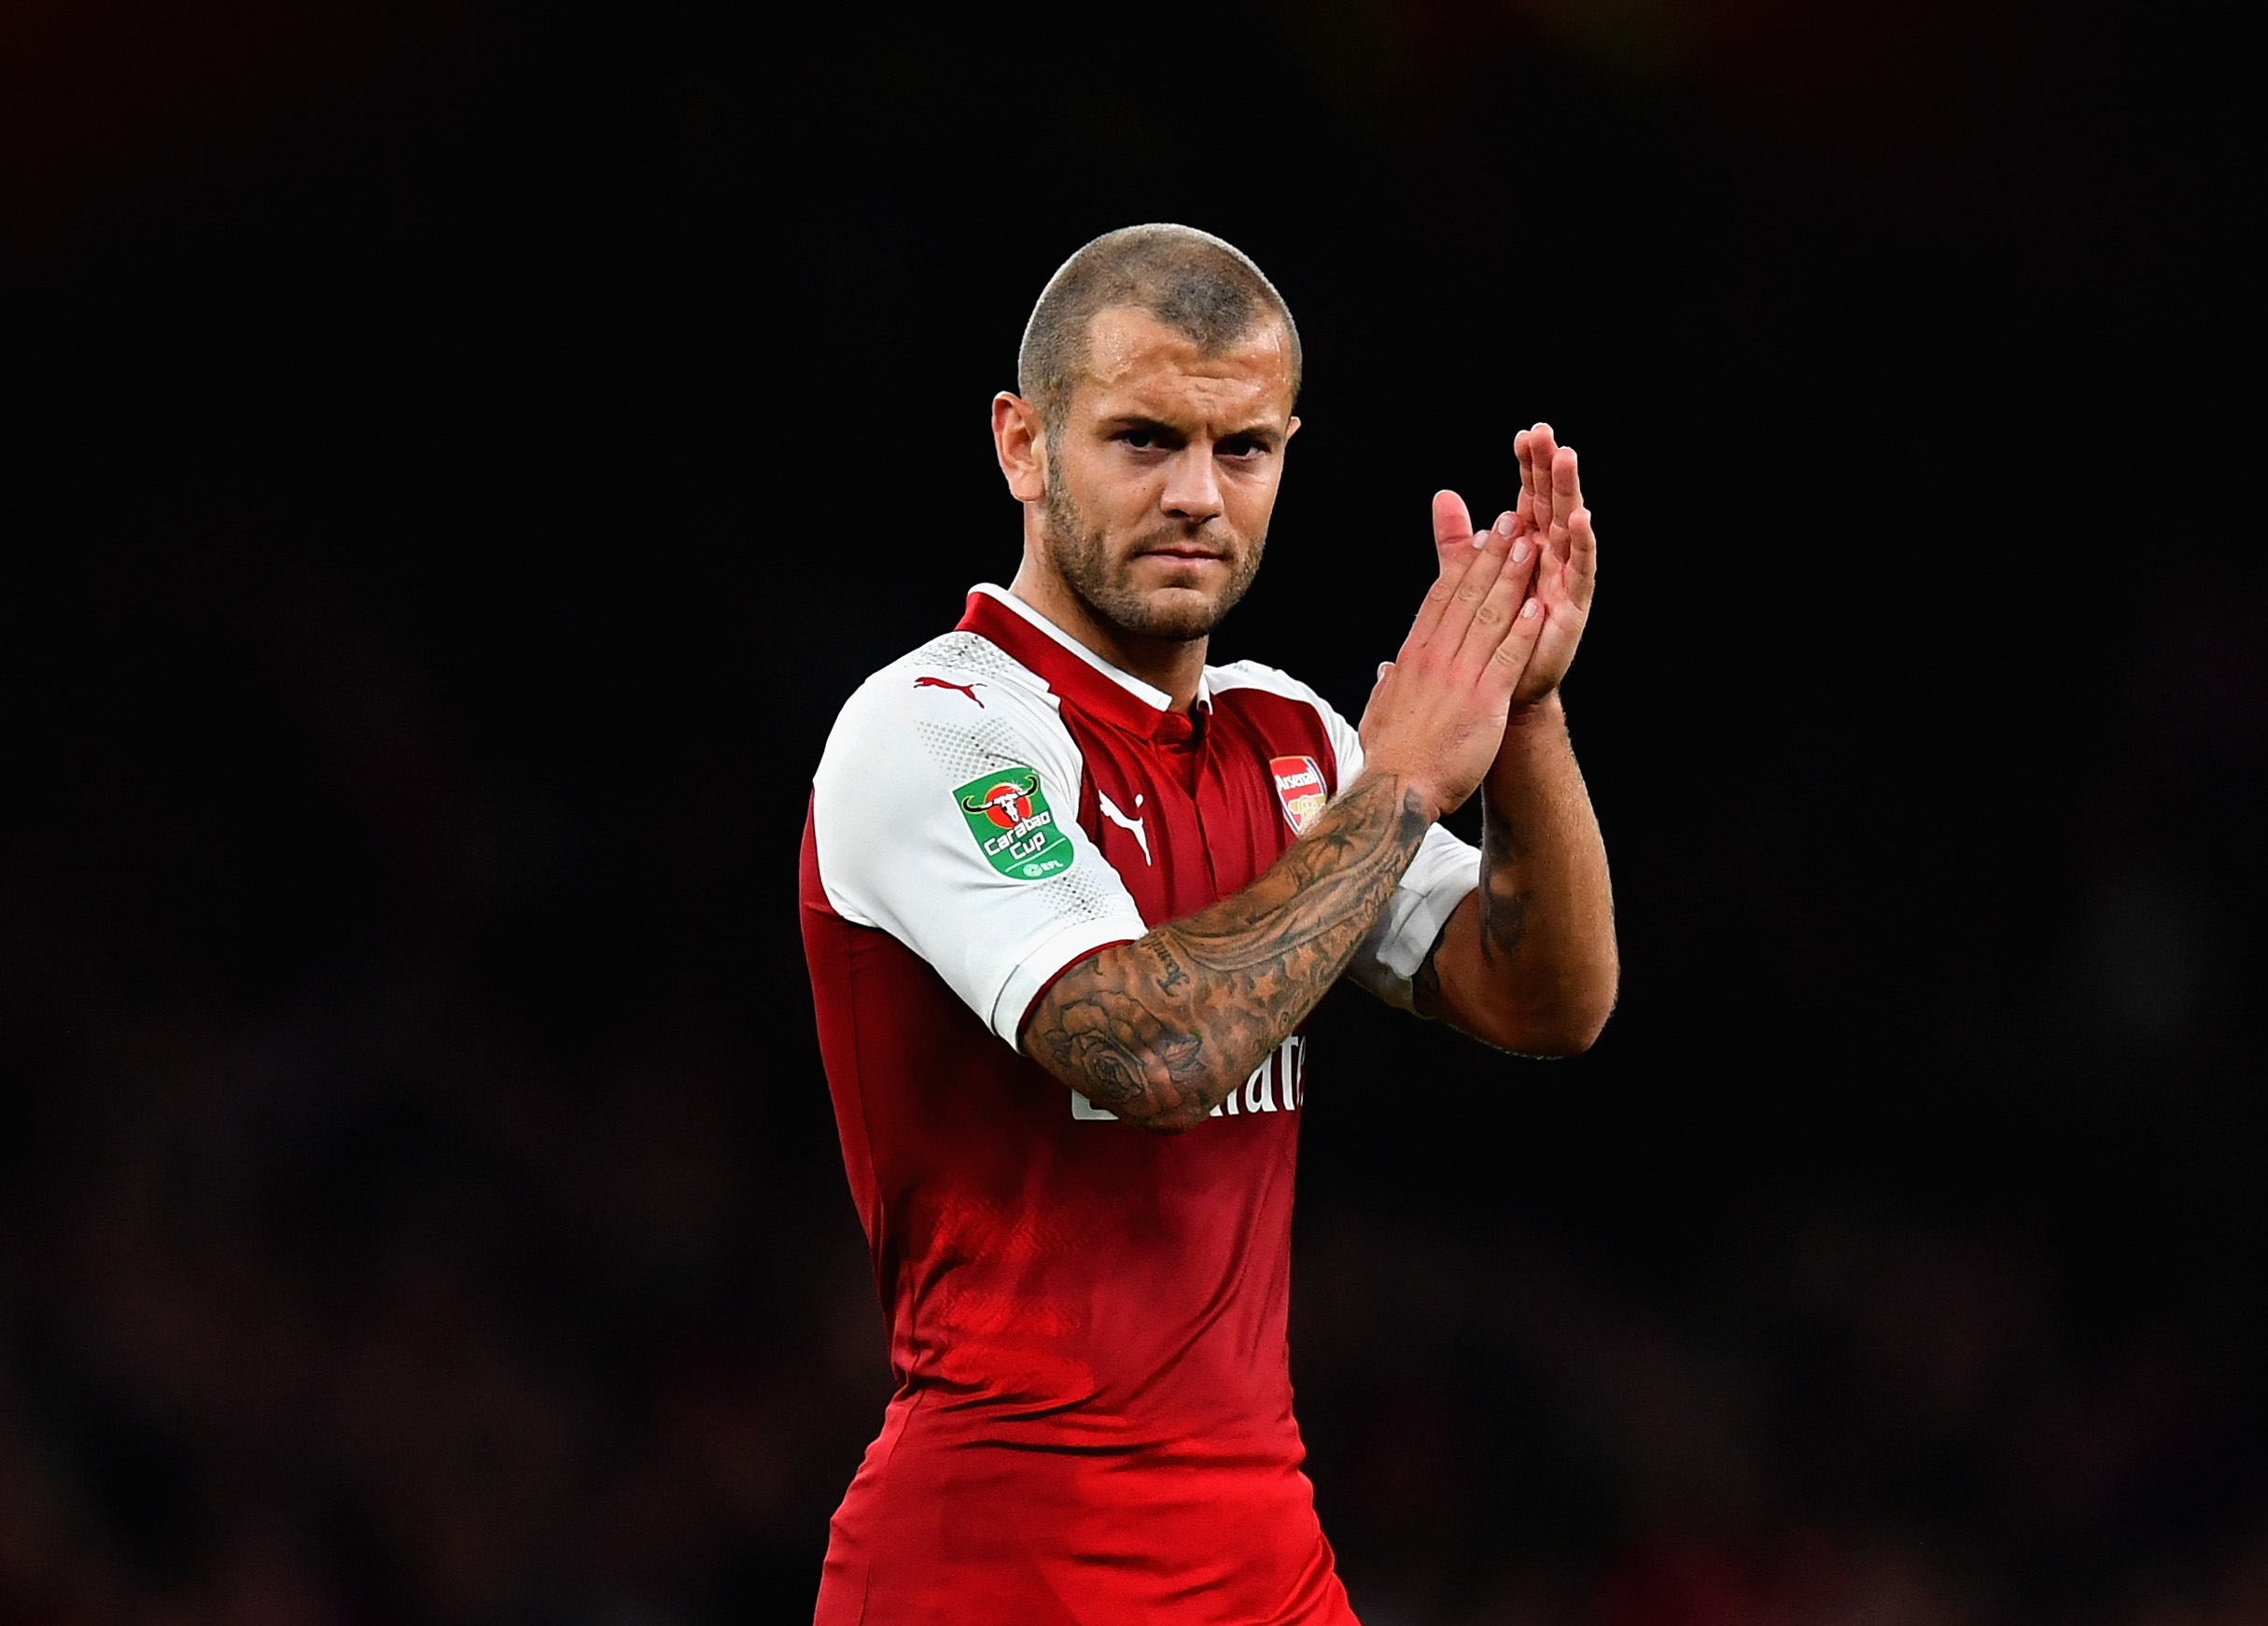 LONDON, ENGLAND - SEPTEMBER 20:  Jack Wilshere of Arsenal shows appreciation to the fans during the Carabao Cup Third Round match between Arsenal and Doncaster Rovers at Emirates Stadium on September 20, 2017 in London, England.  (Photo by Dan Mullan/Getty Images)